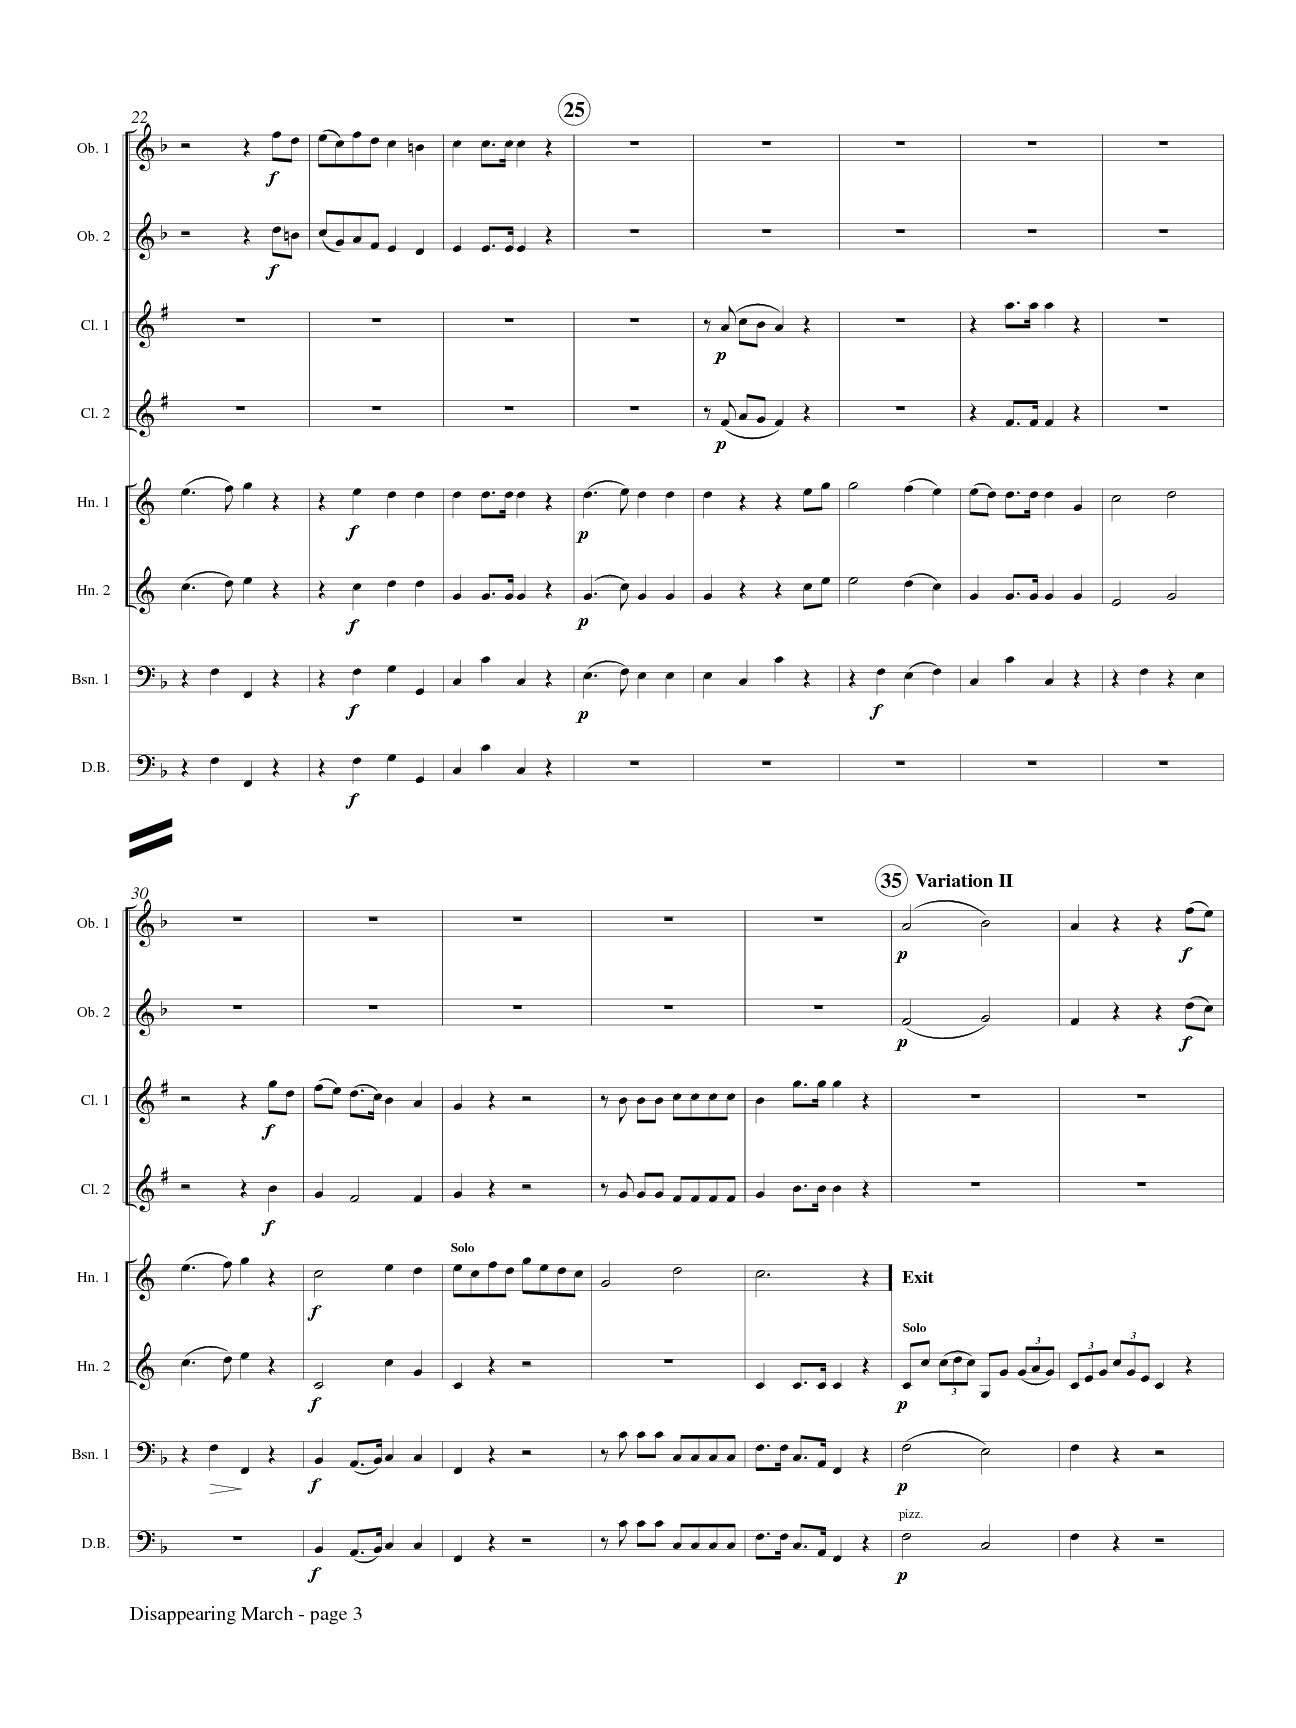 Druschetzky (arr. Christopher Weait) - Disappearing March from Partita No. 21